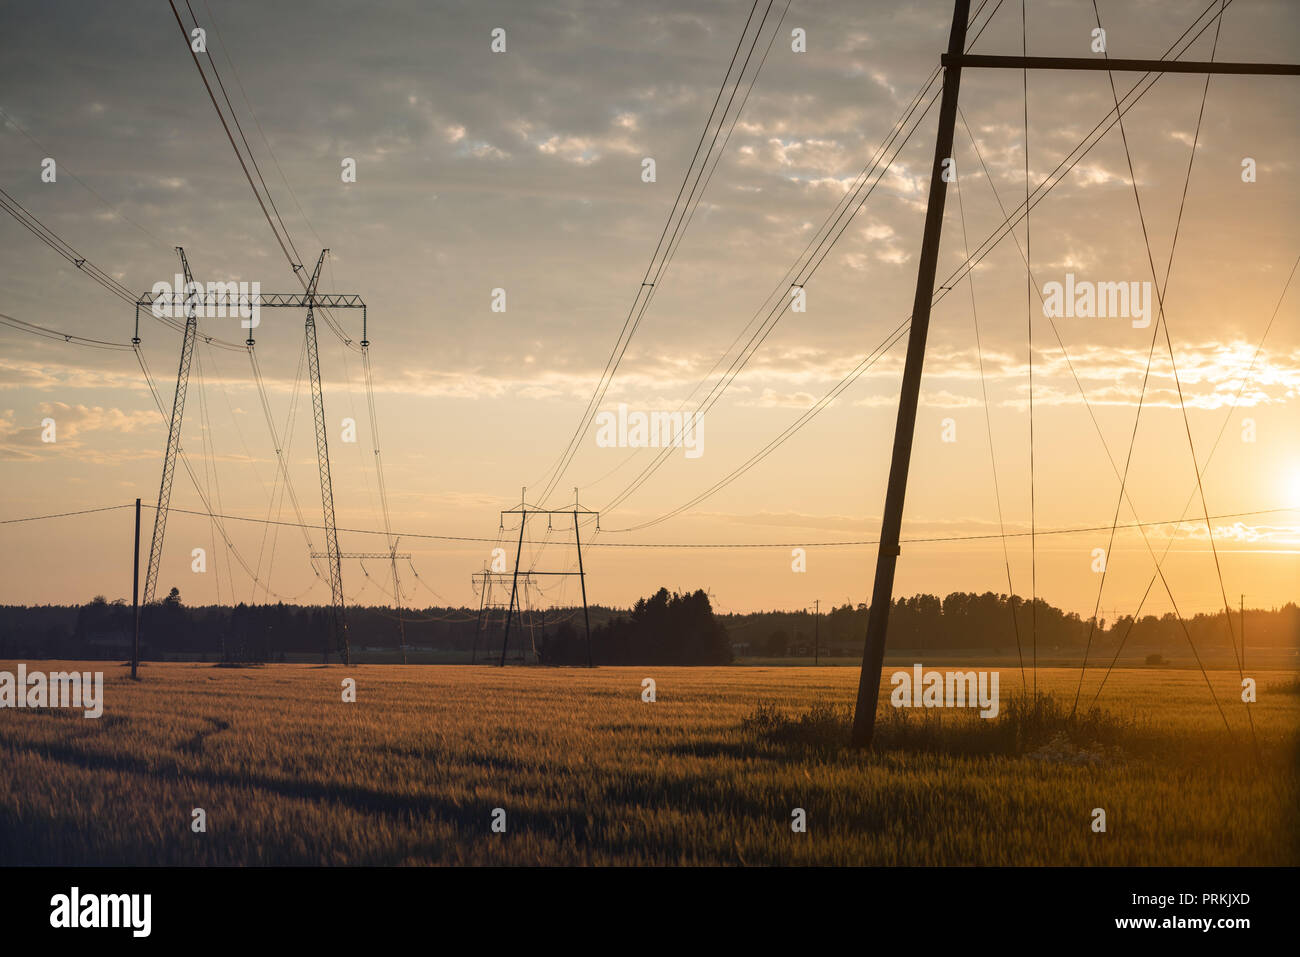 Silhouette of a power lines crossing a field at golden sunset Stock Photo